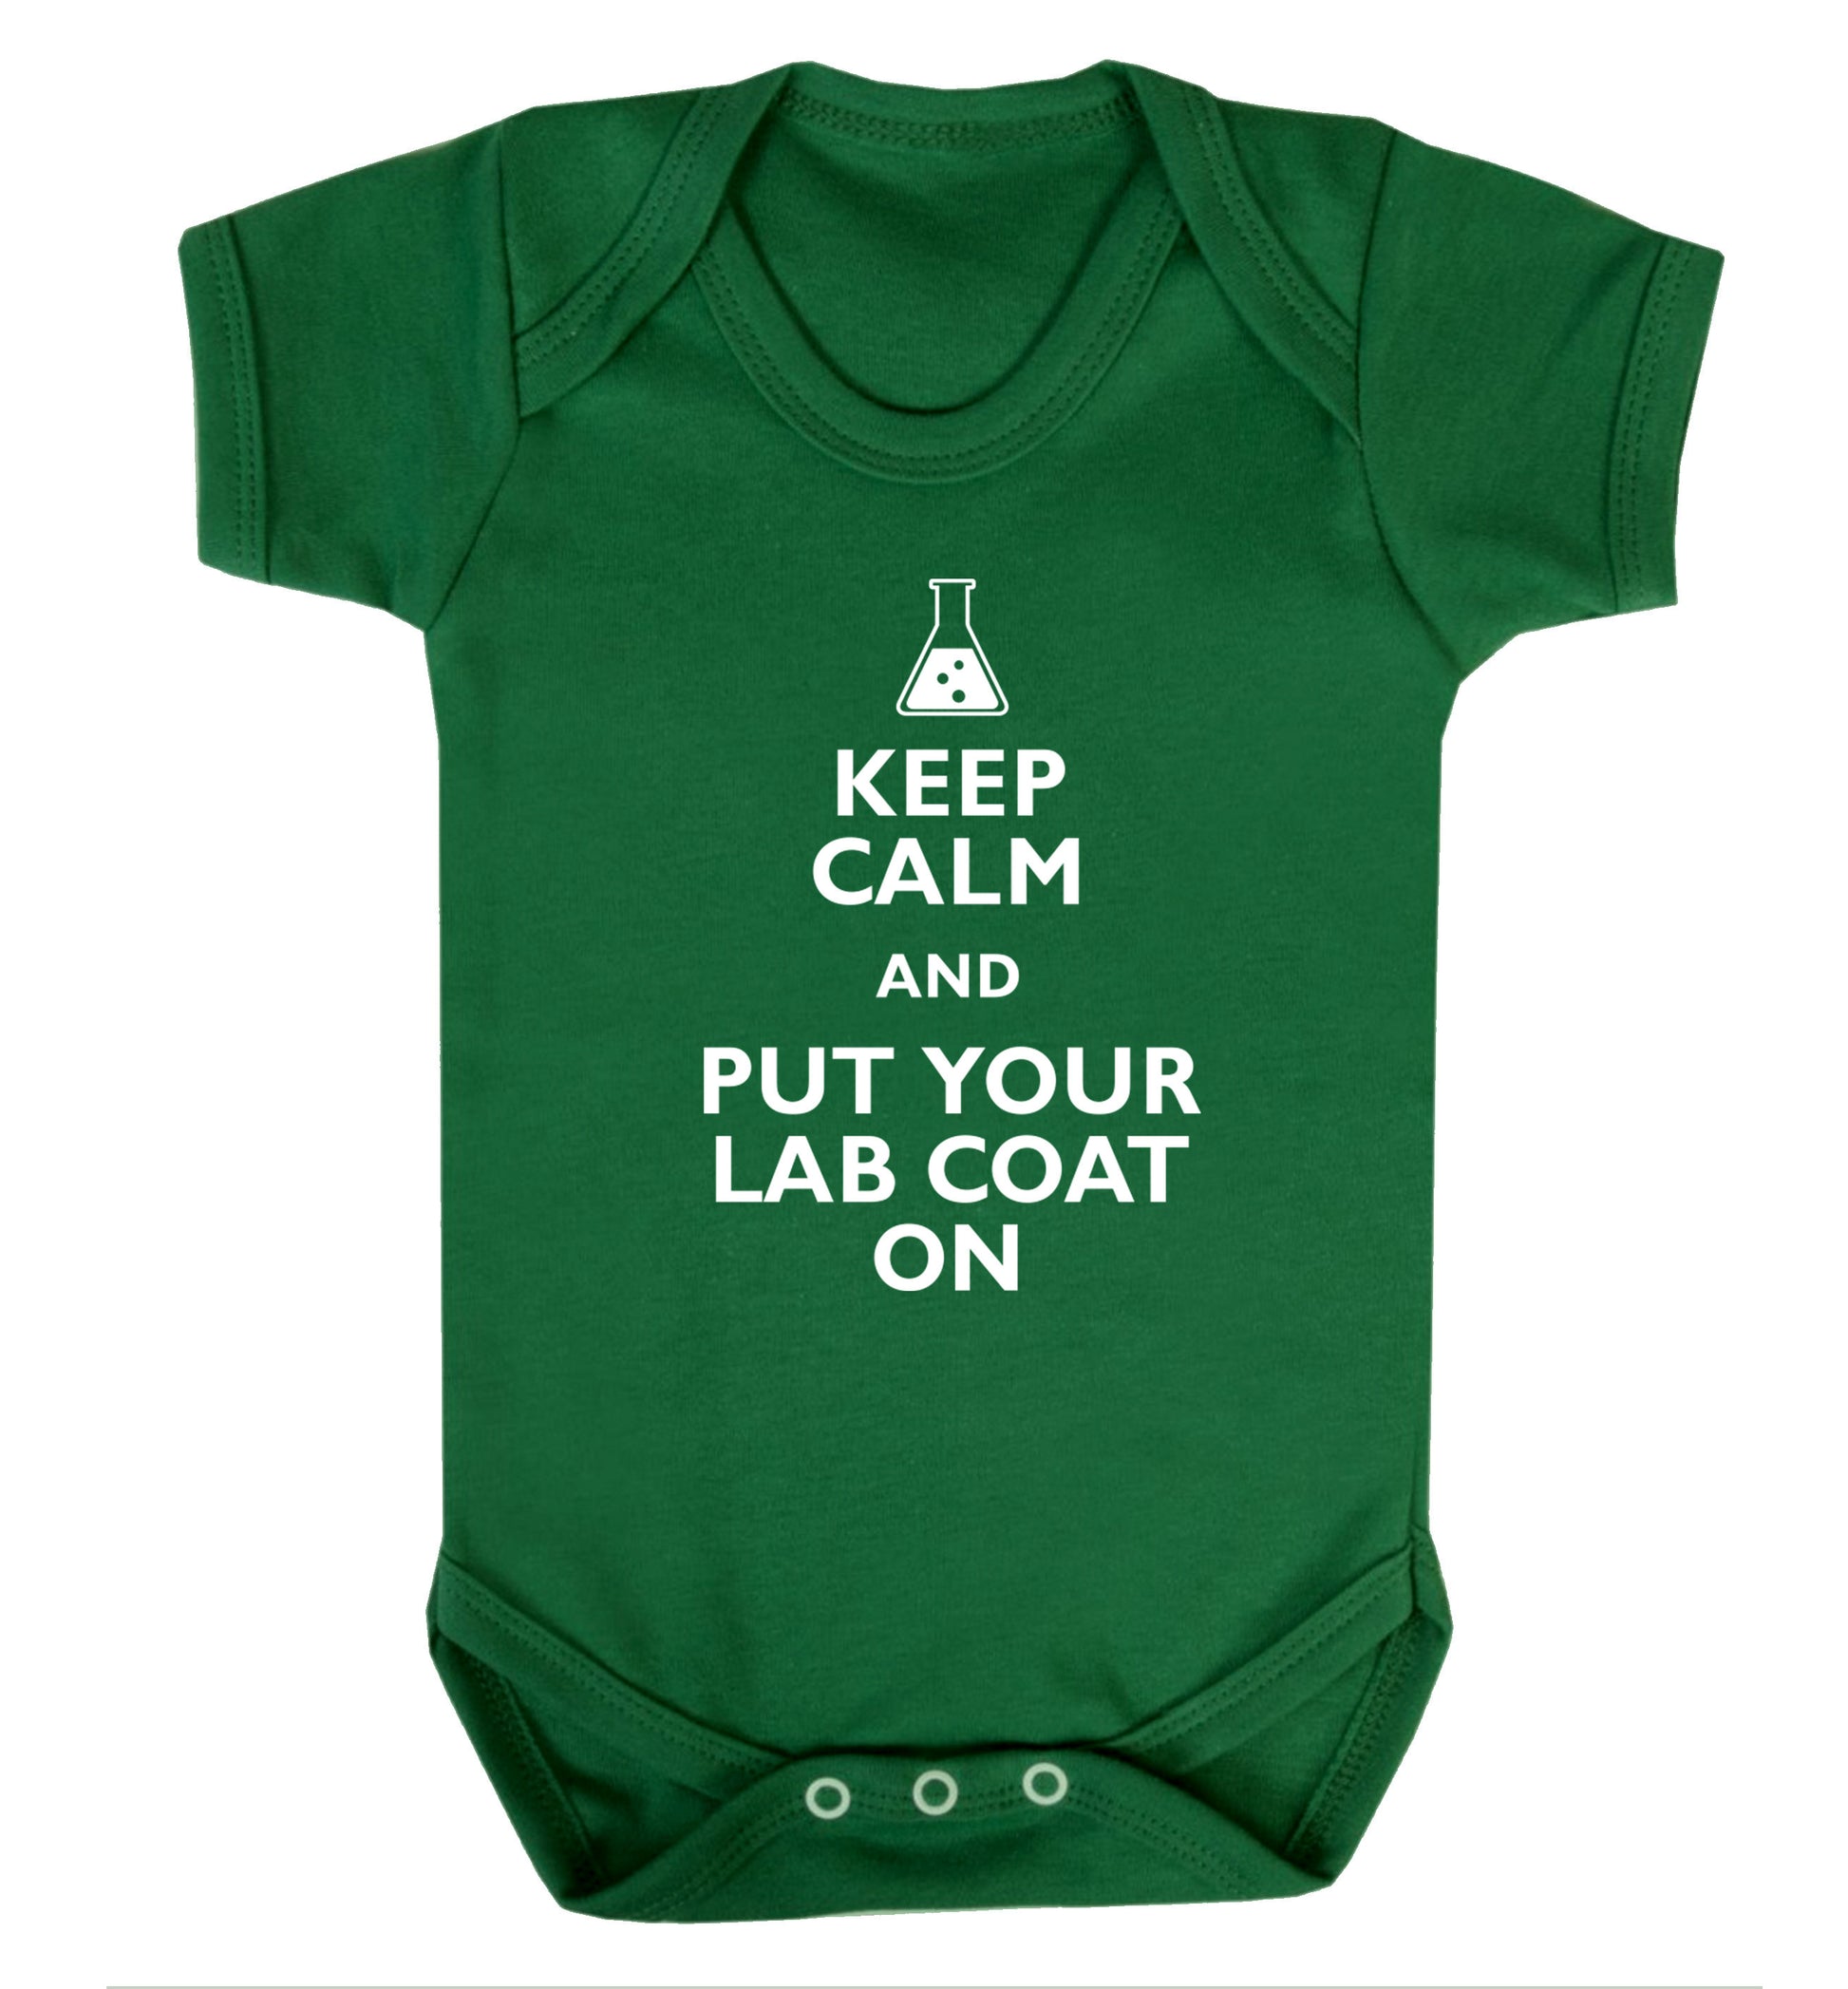 Keep calm and put your lab coat on Baby Vest green 18-24 months